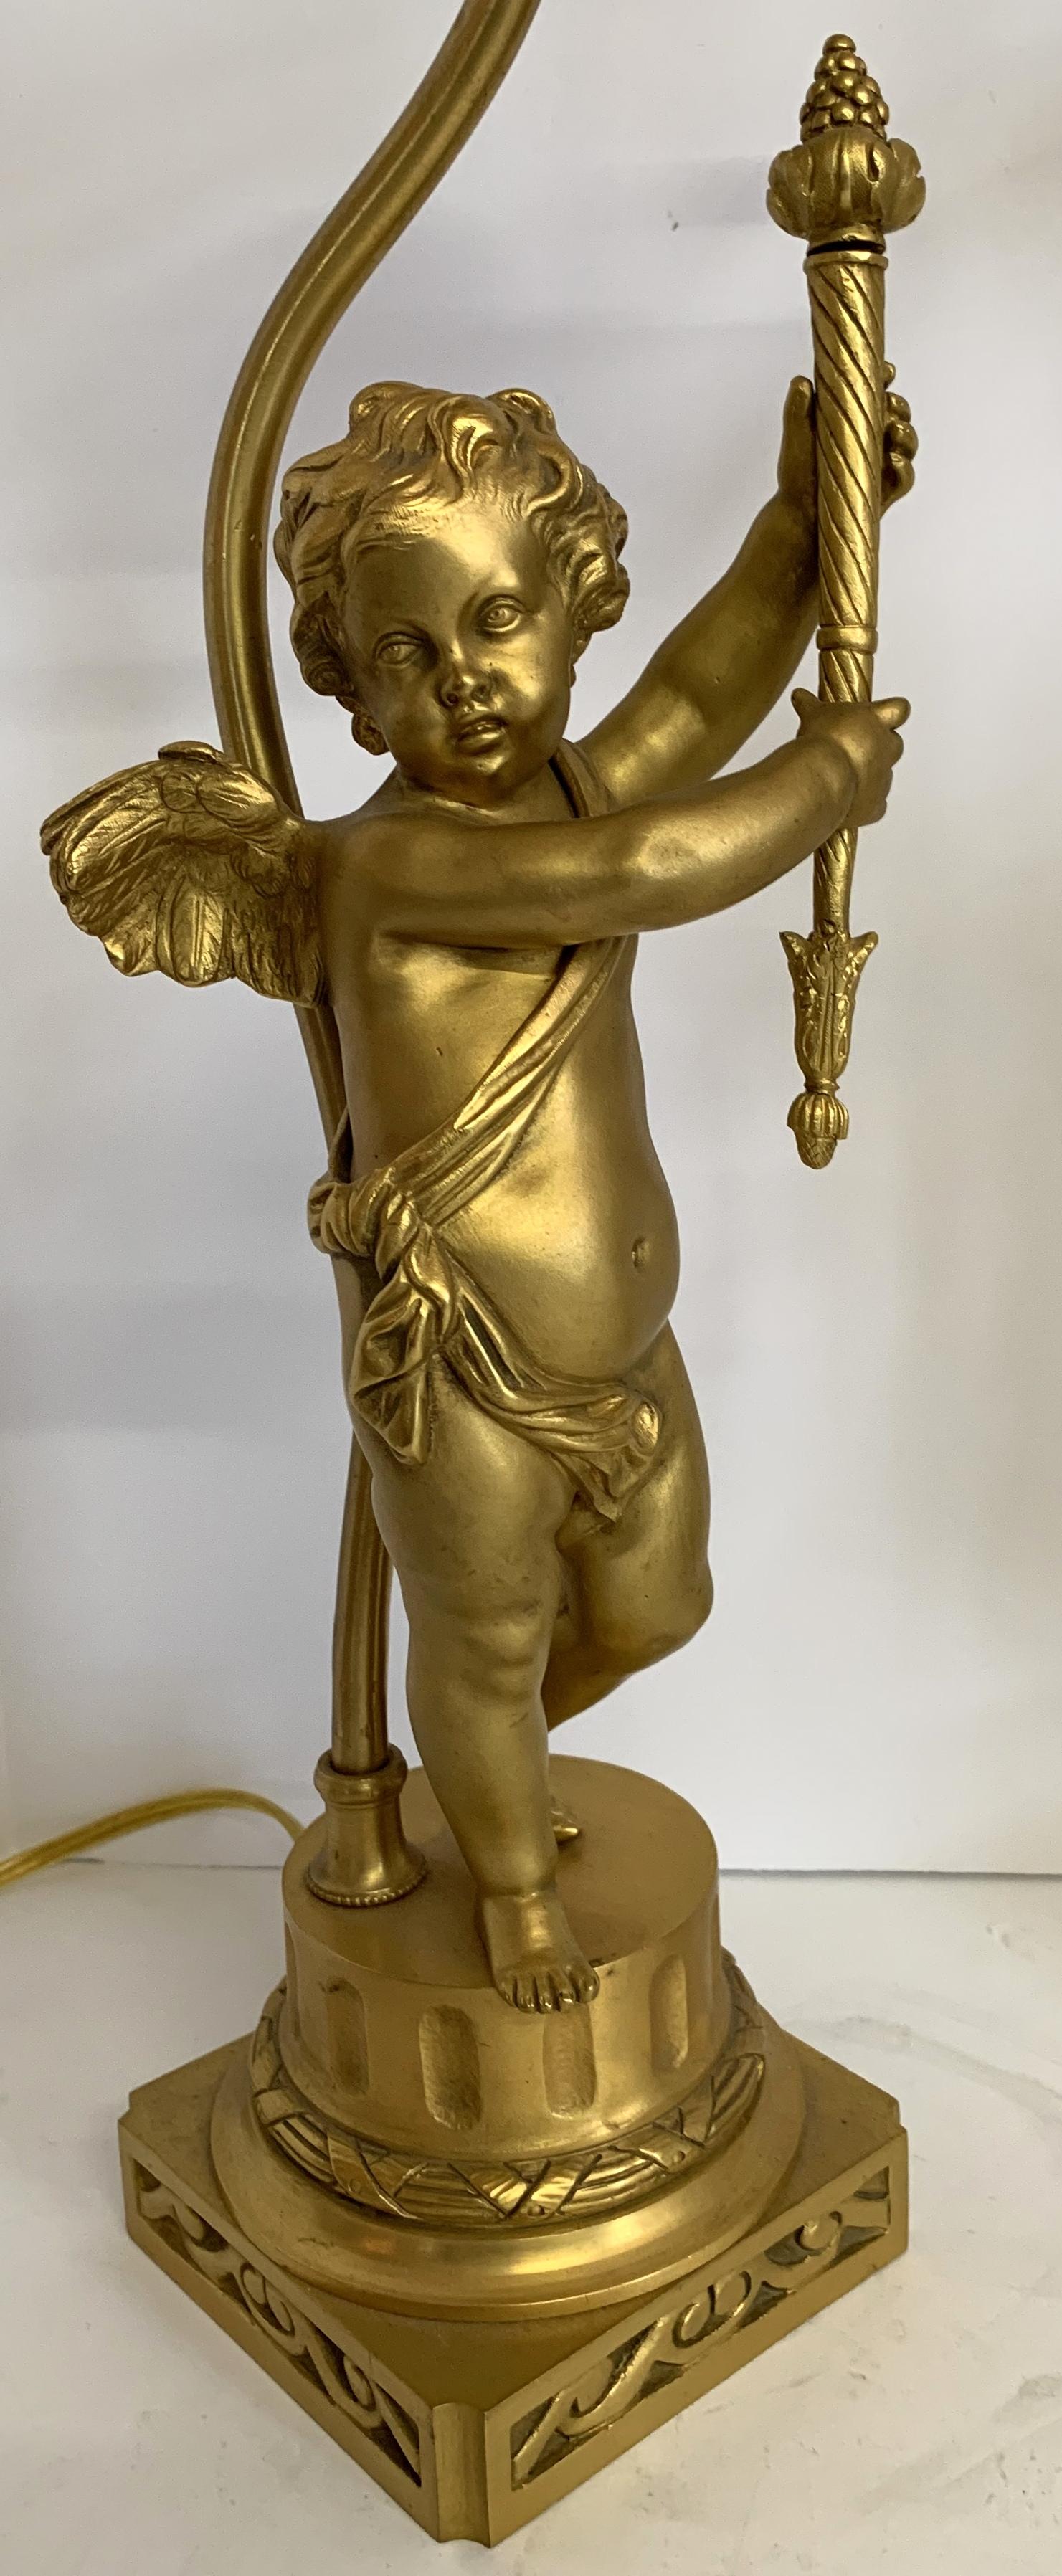 A wonderful pair of French dore bronze winged cherub / putti figural sculptures holding torches converted into lamps.